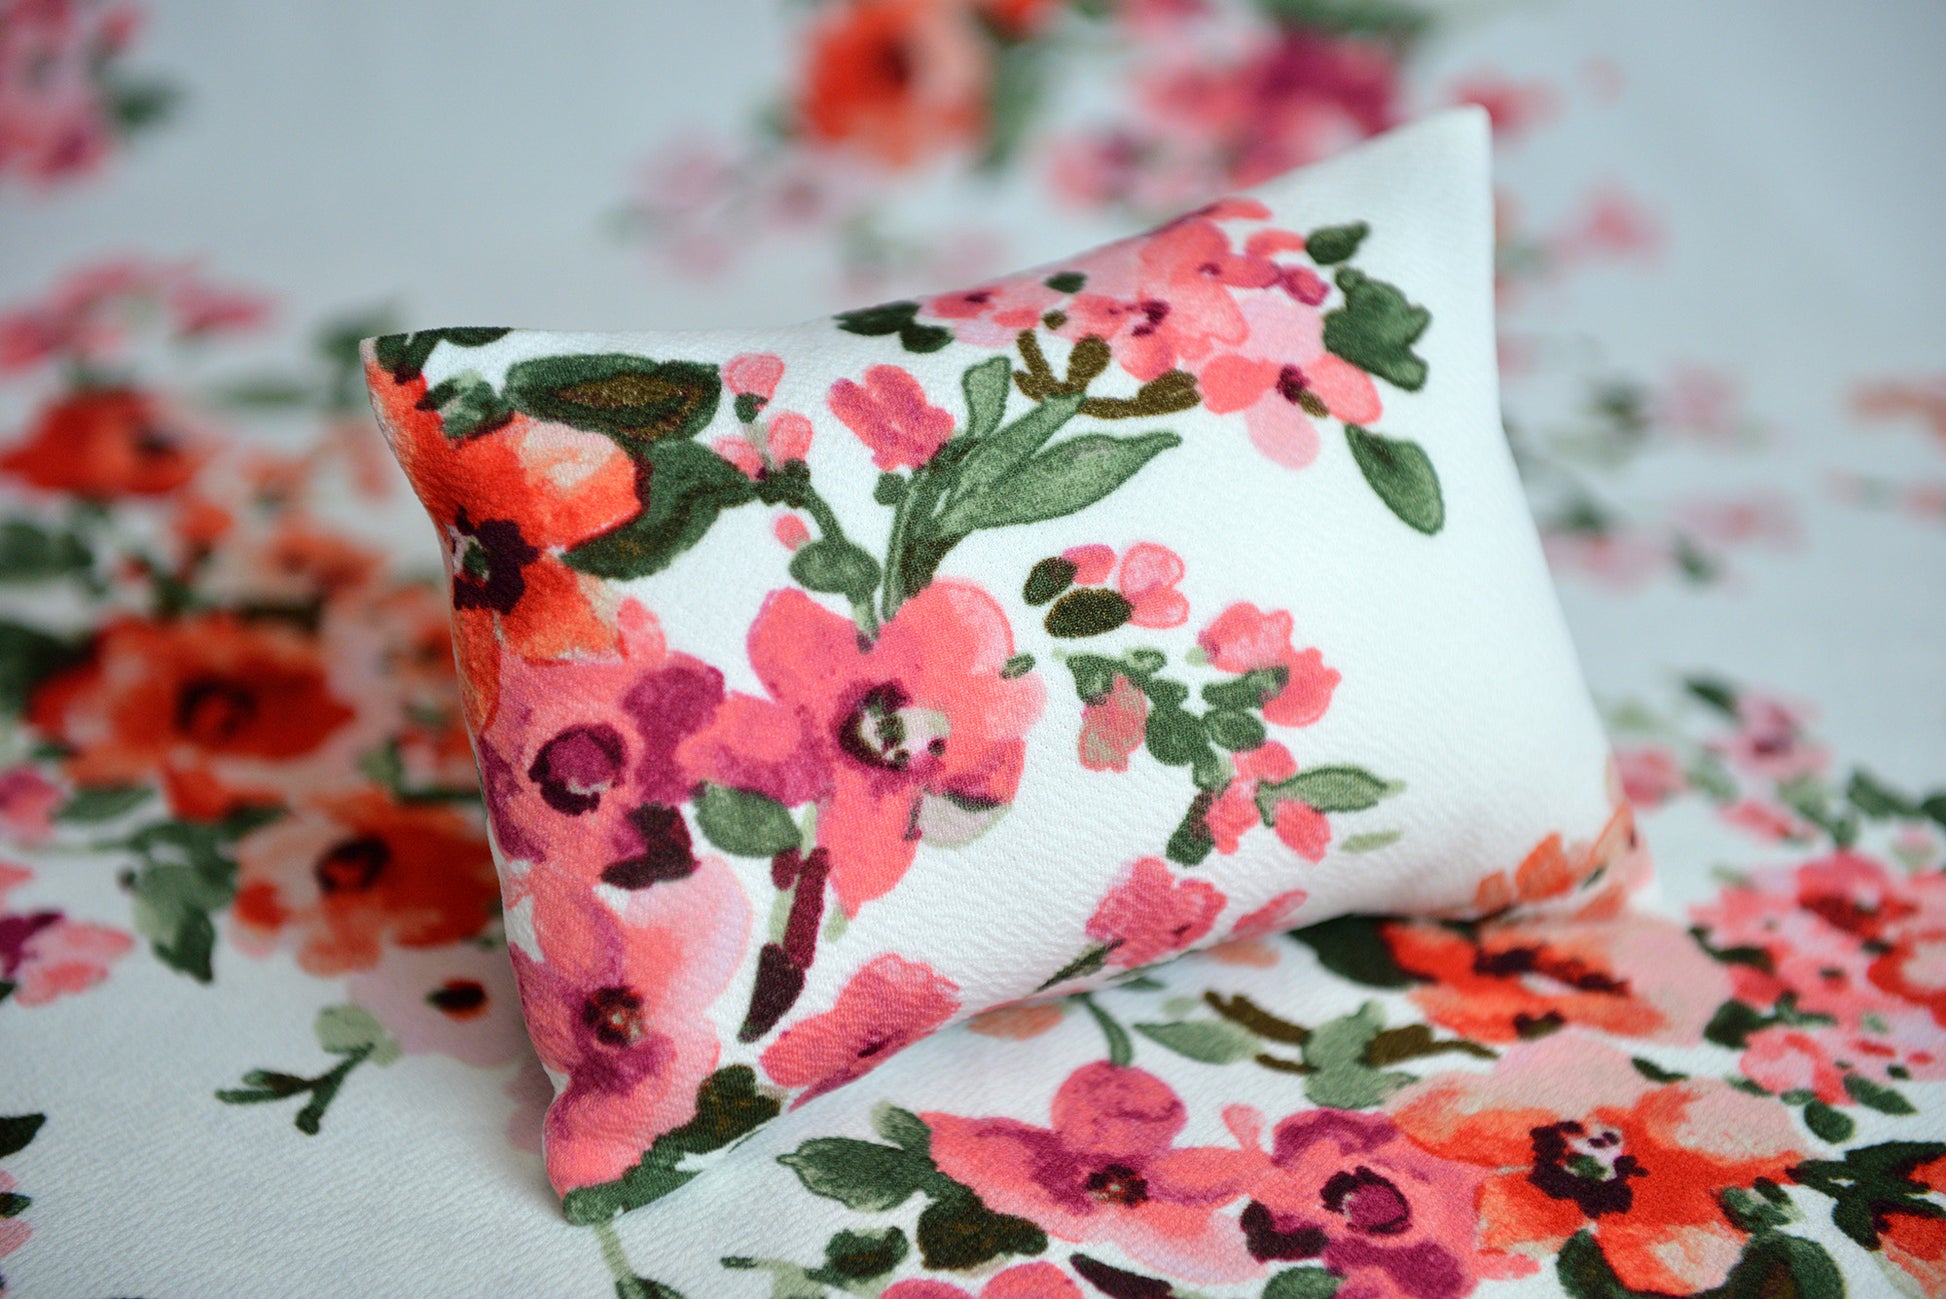 Mini Pillow with Cover - Textured - Floral 7-Newborn Photography Props